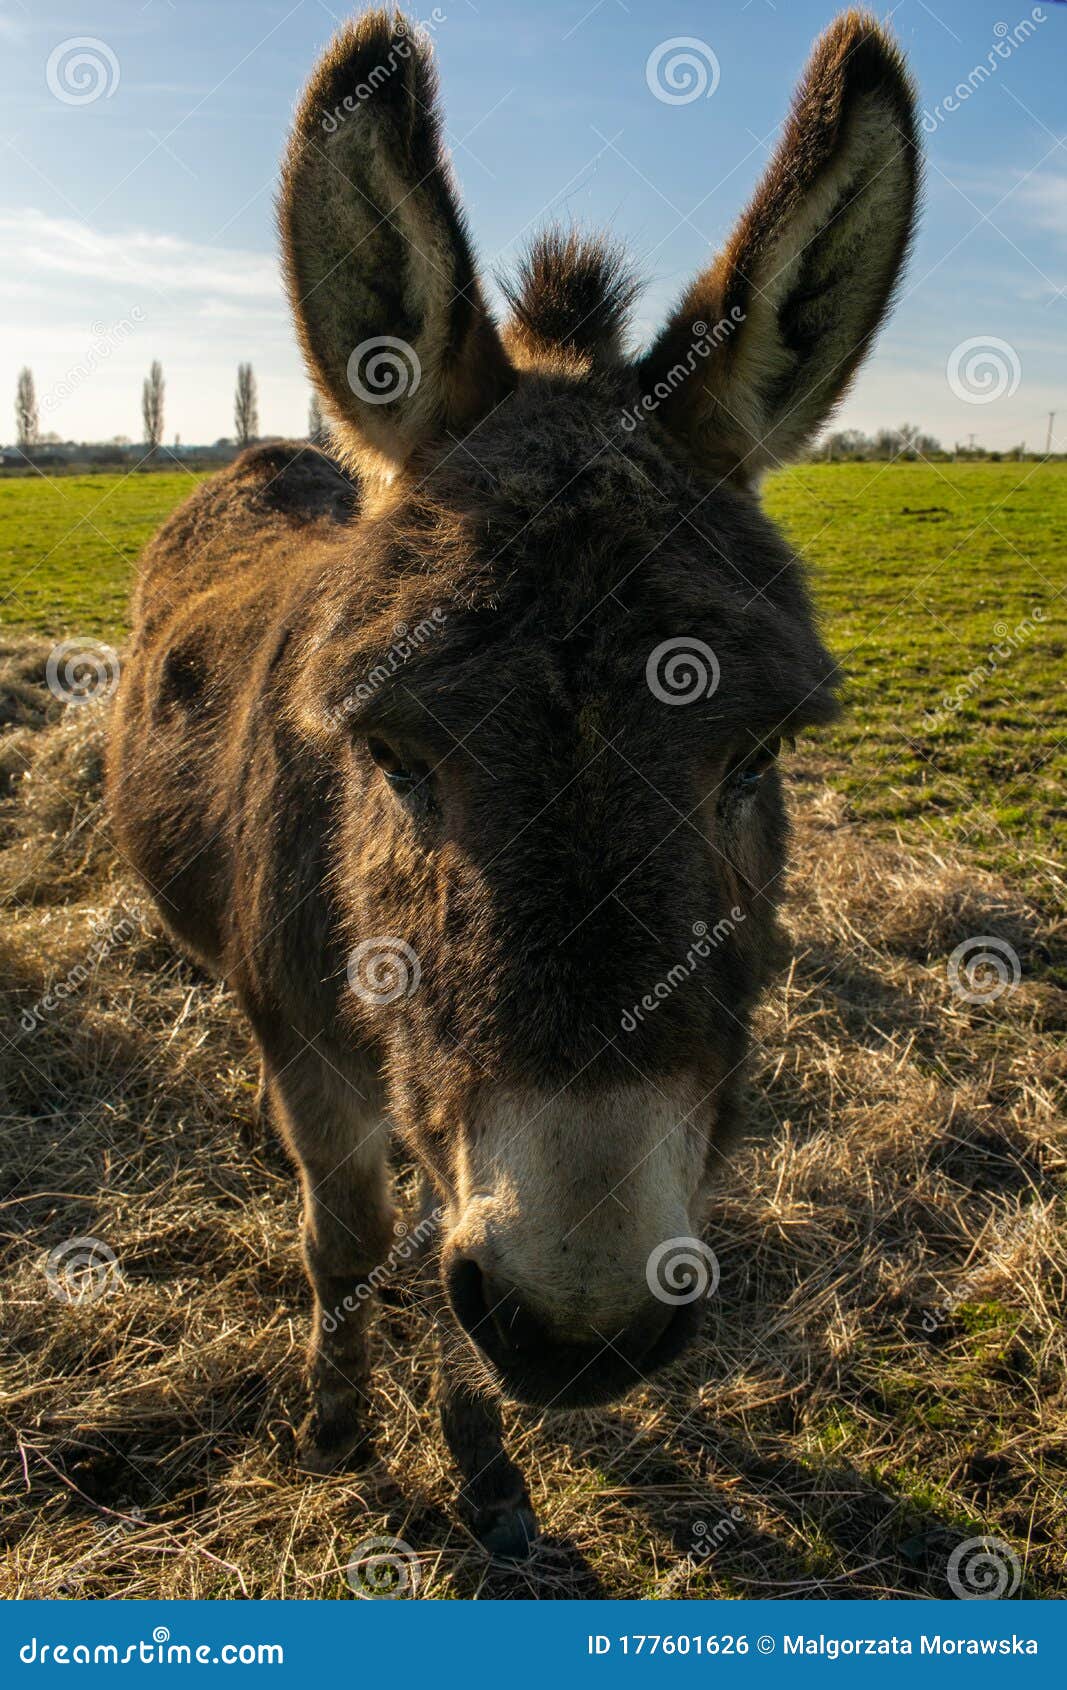 Cute Donkey On A Farm Curious Animal Comming And Looking Into A Camera